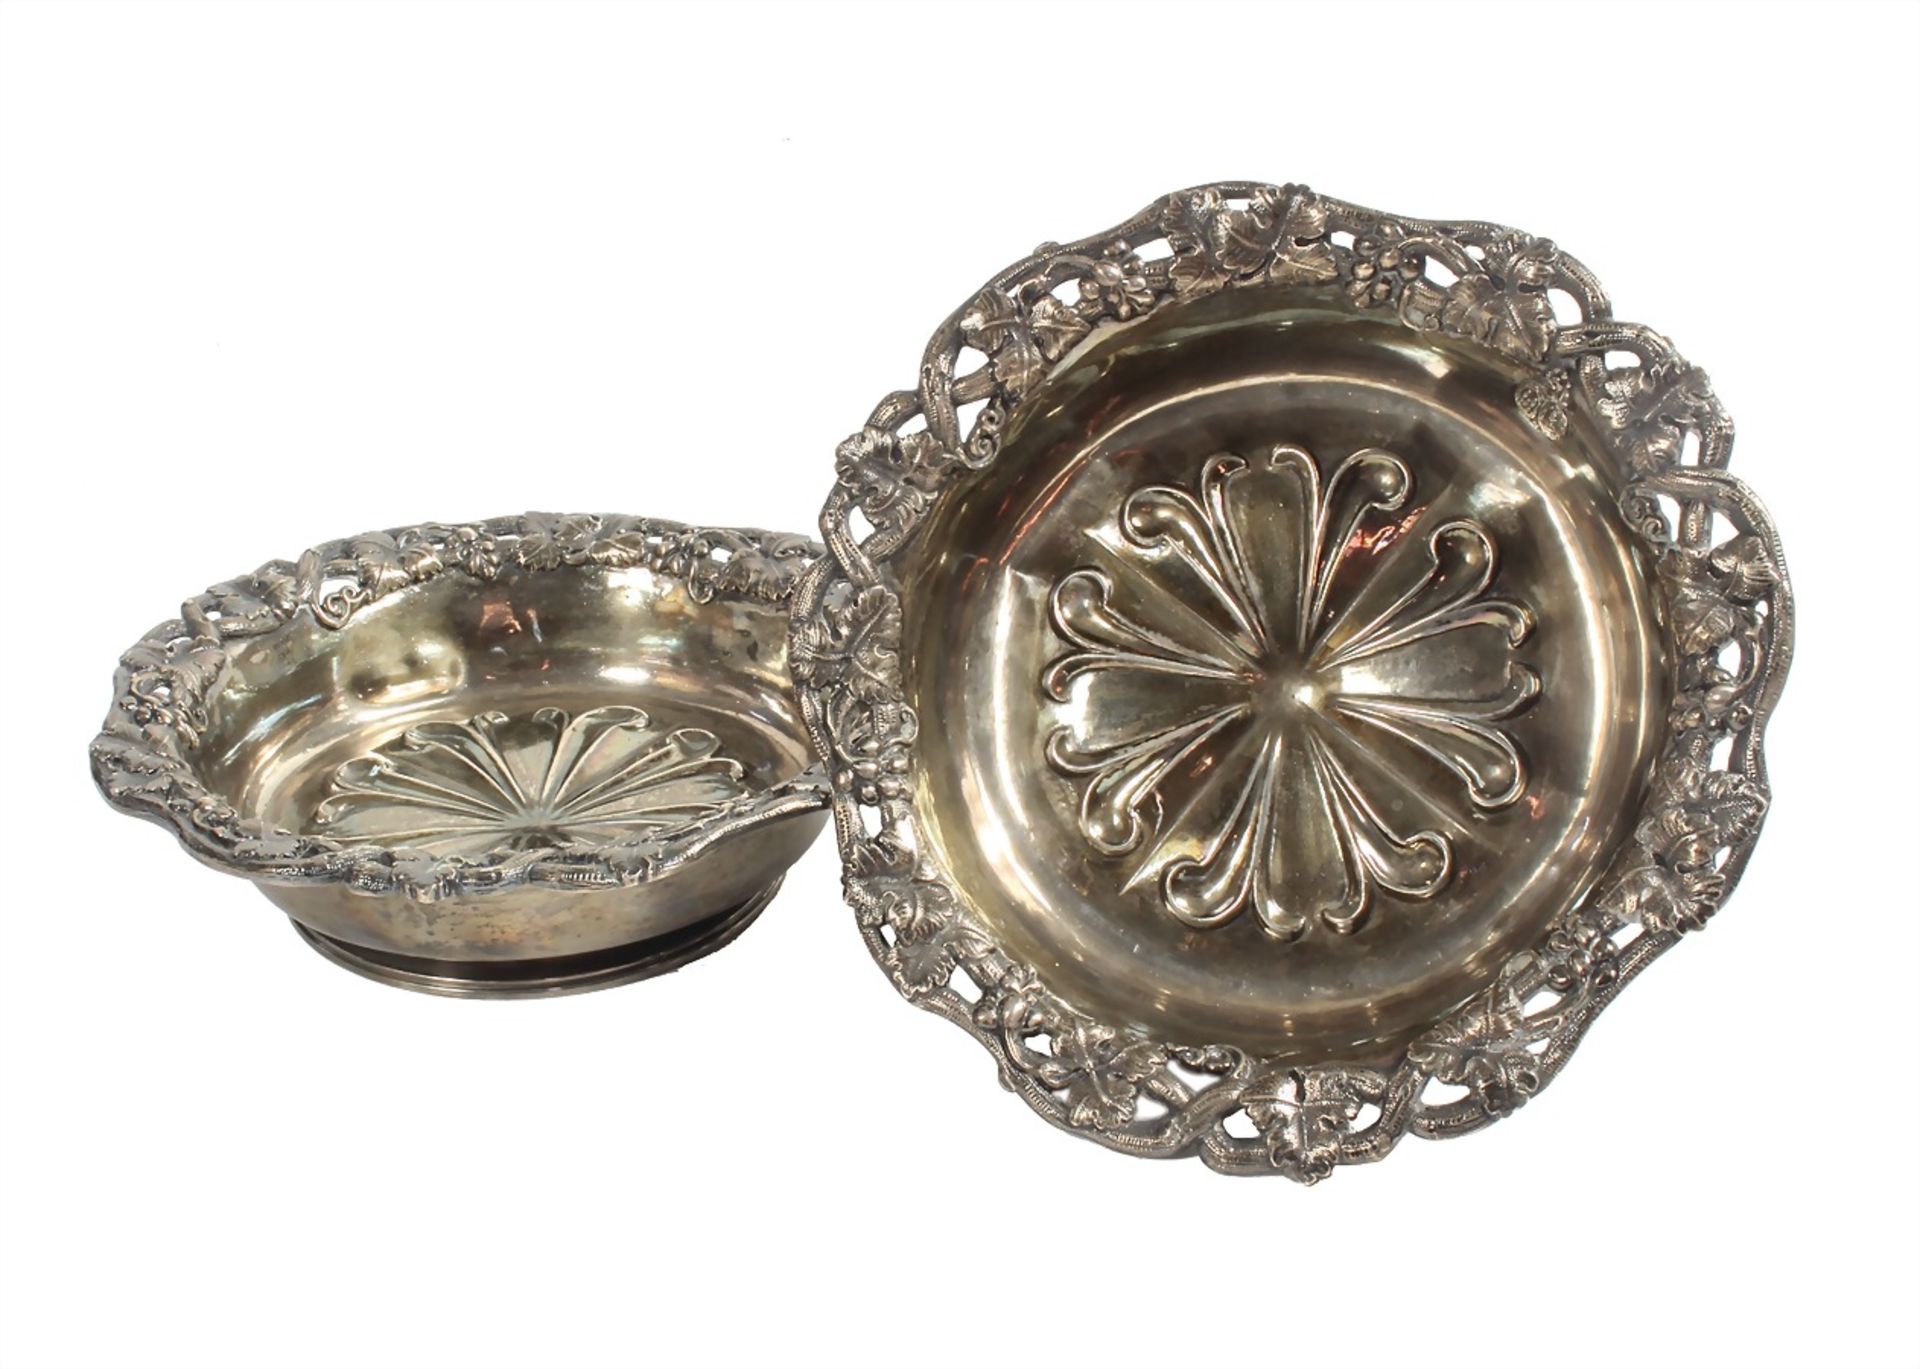 a pair of coasters, second half of the 19th century, silver-plated, richly decorated edge with